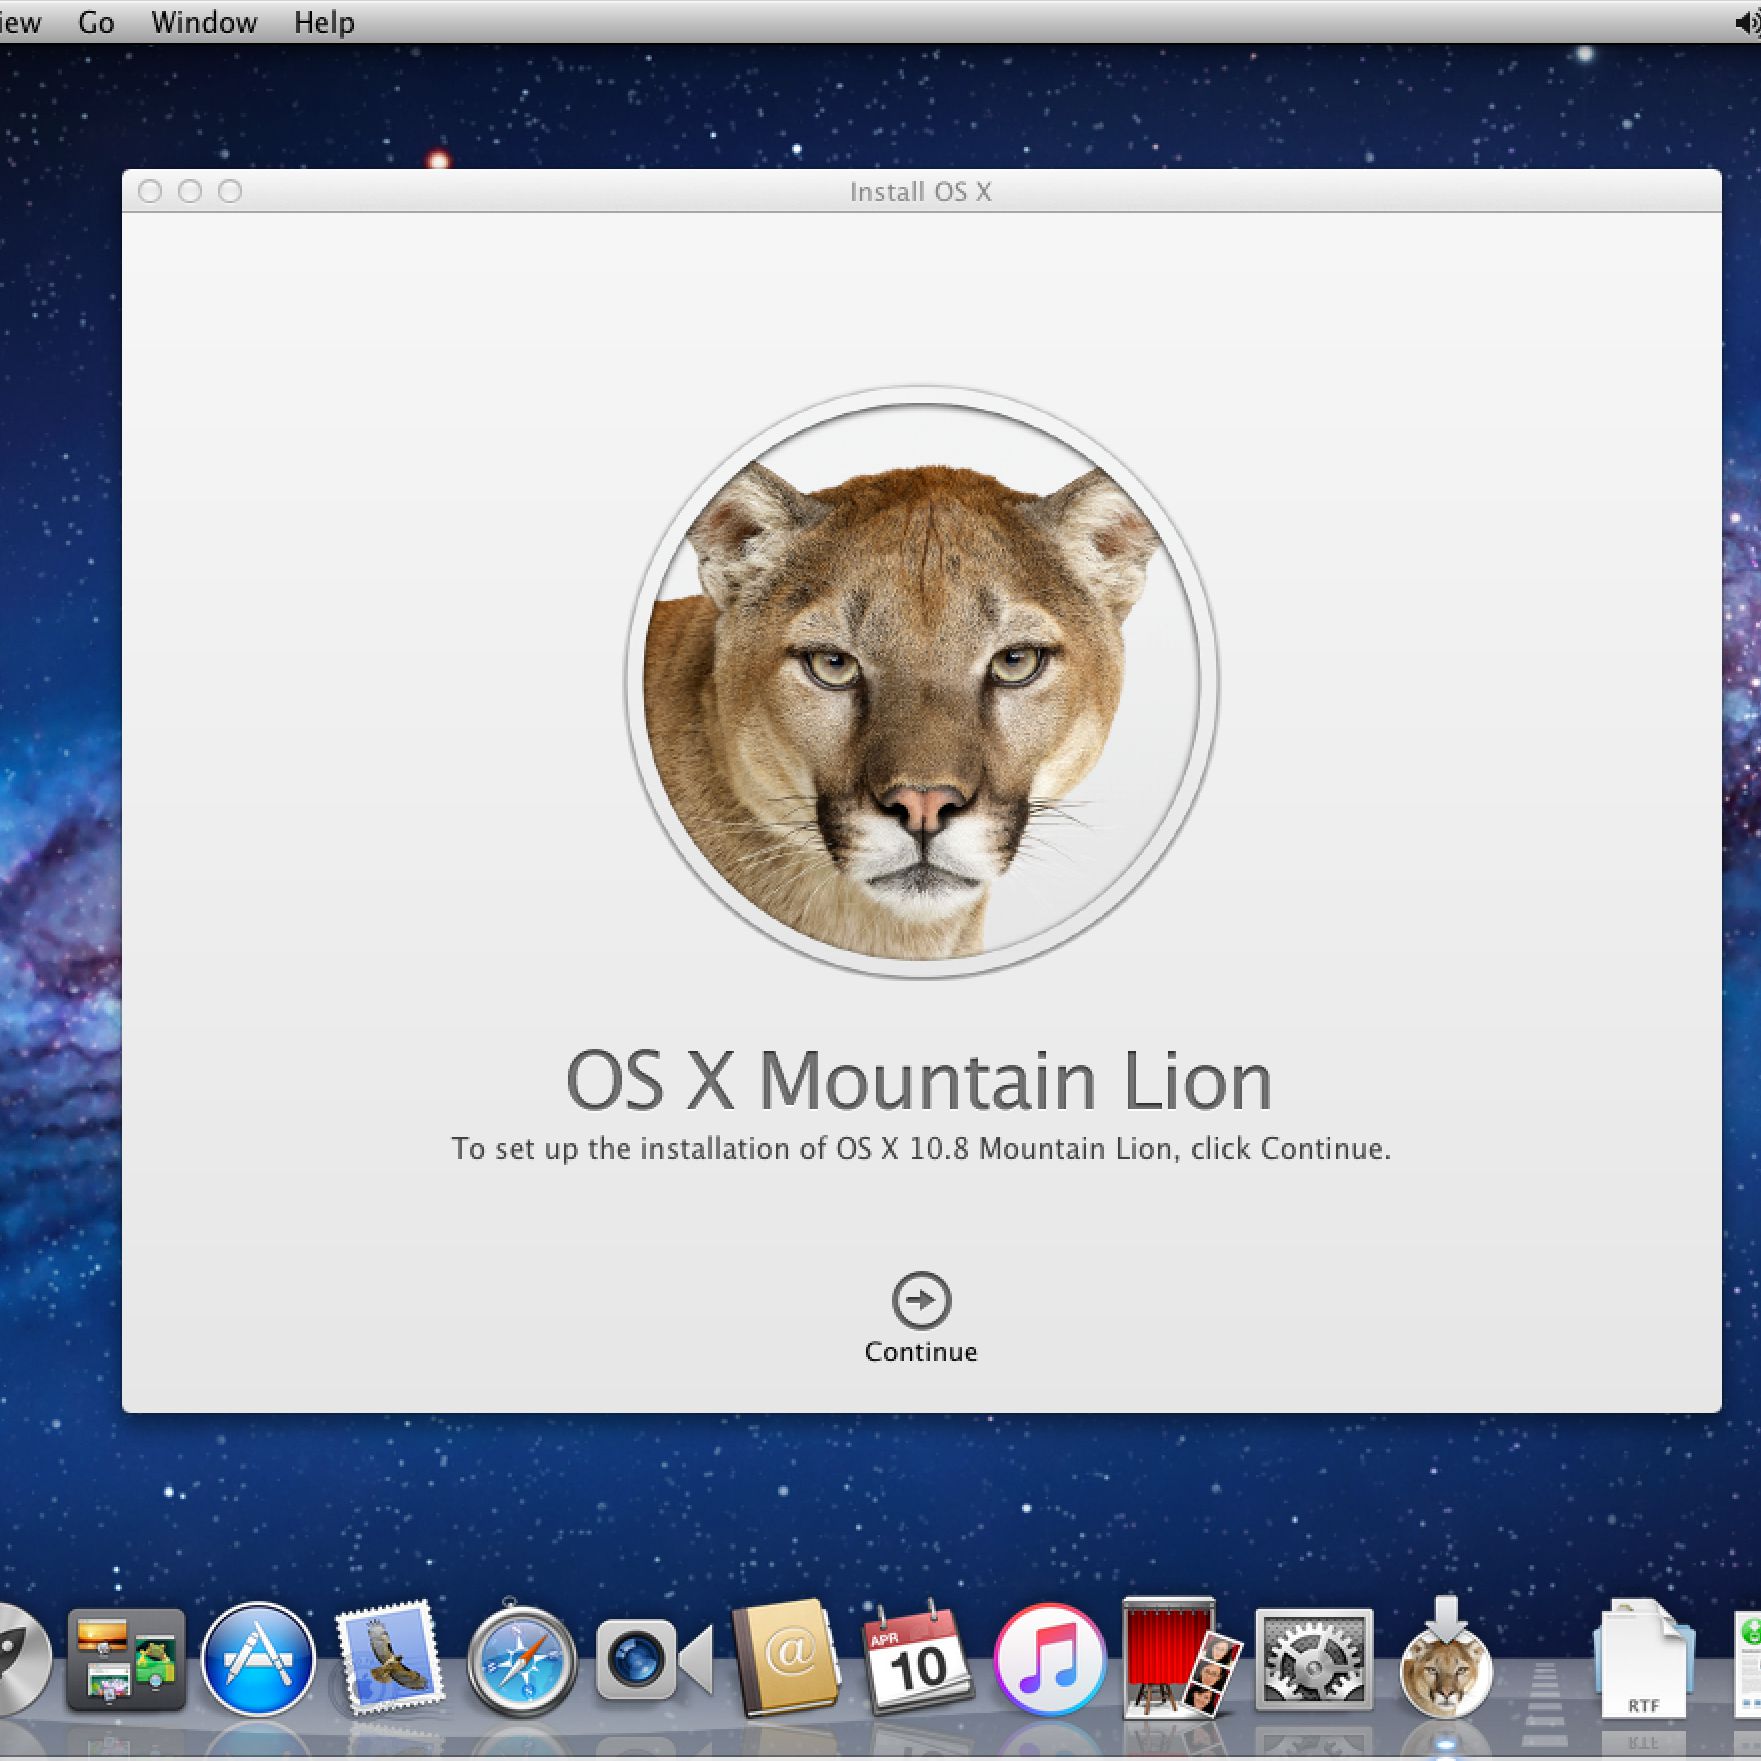 mac os x lion iso image download free for windows 7